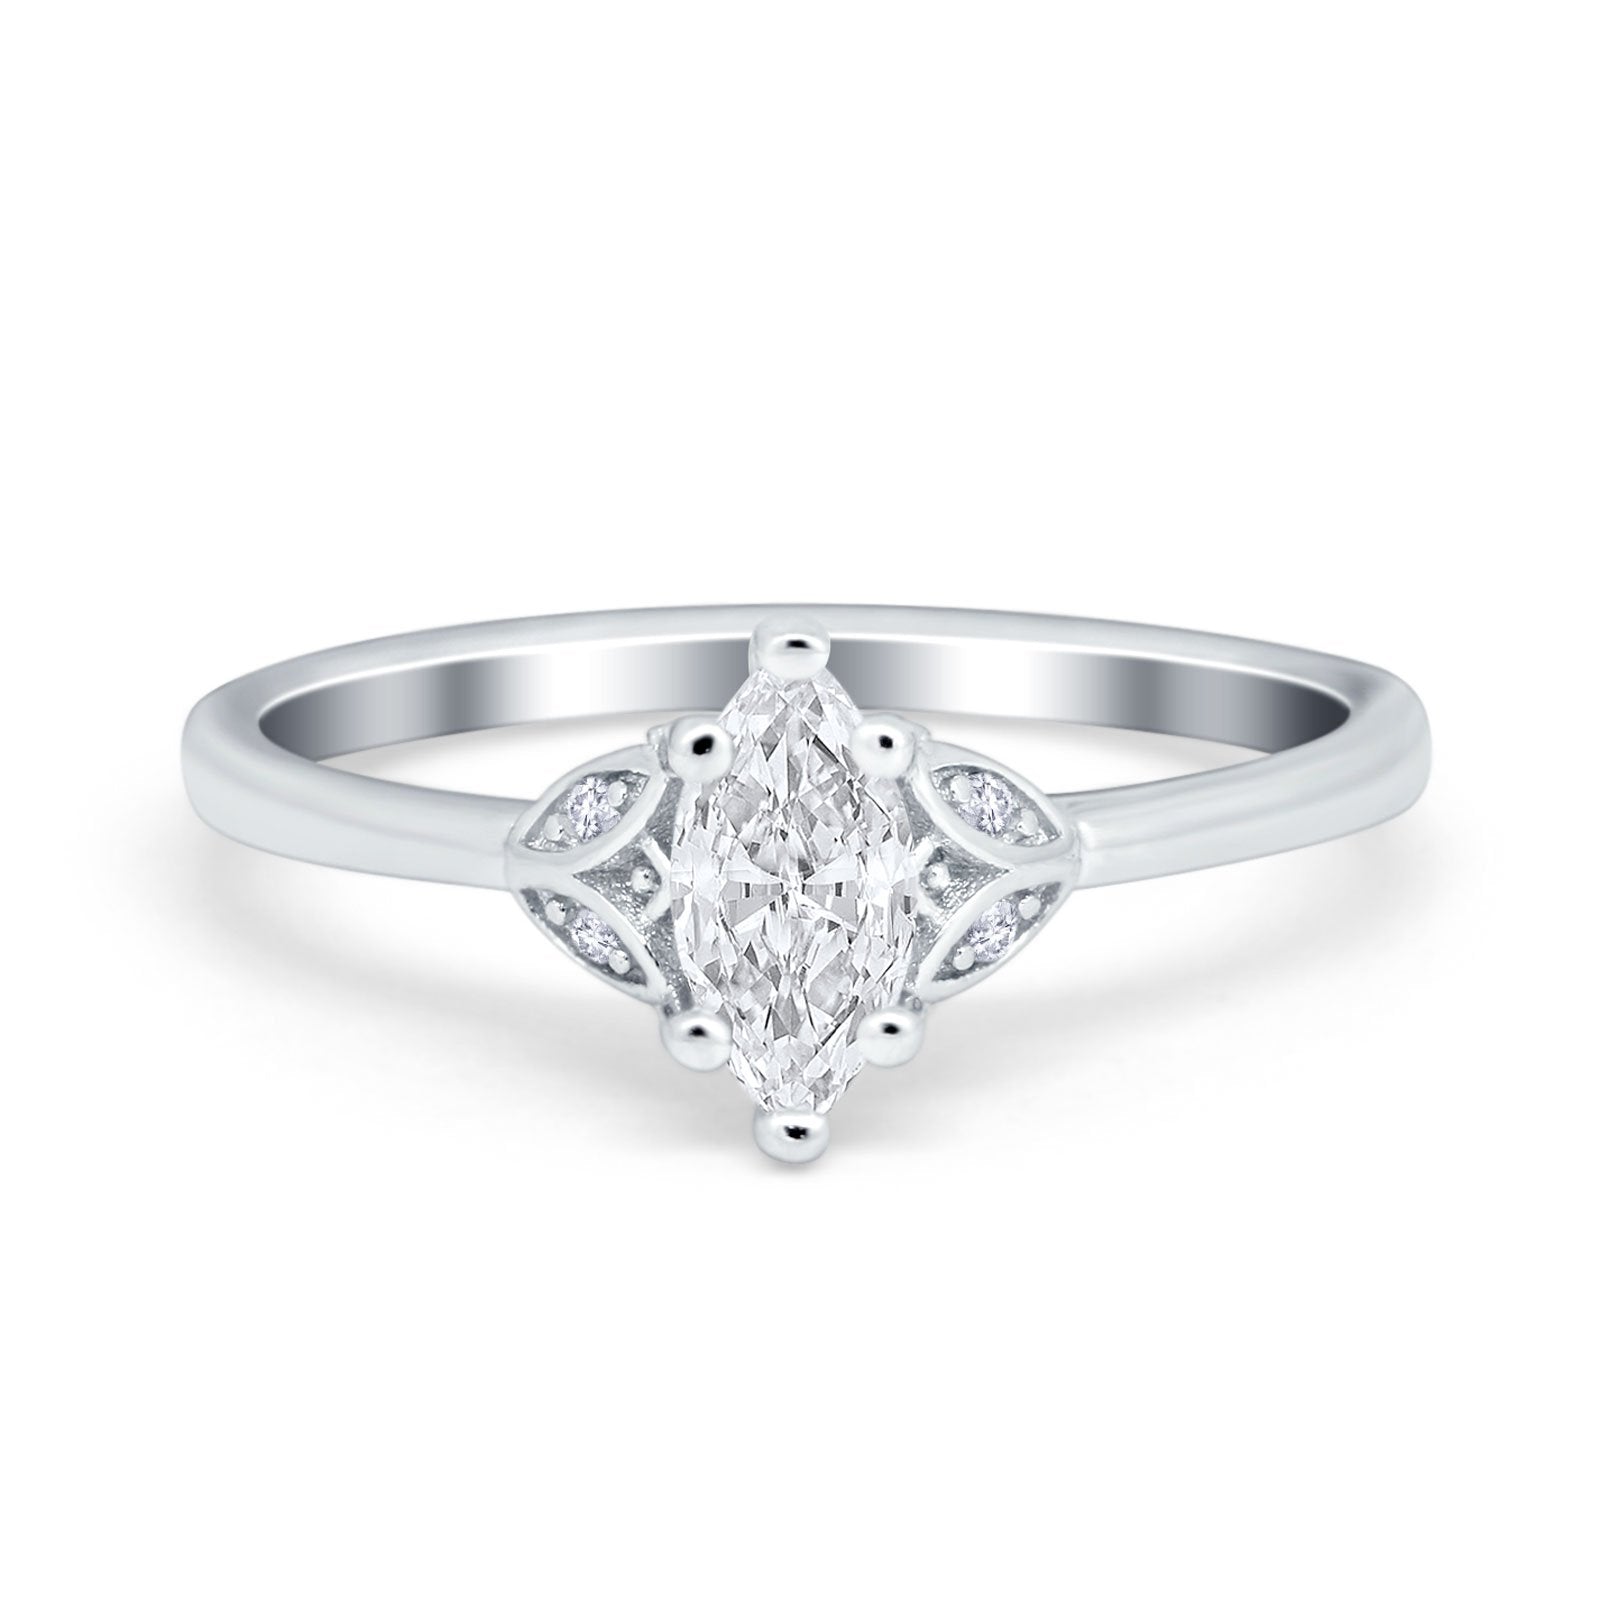 Marquise Art Deco Engagement Ring Simulated Cubic Zirconia 925 Sterling Silver